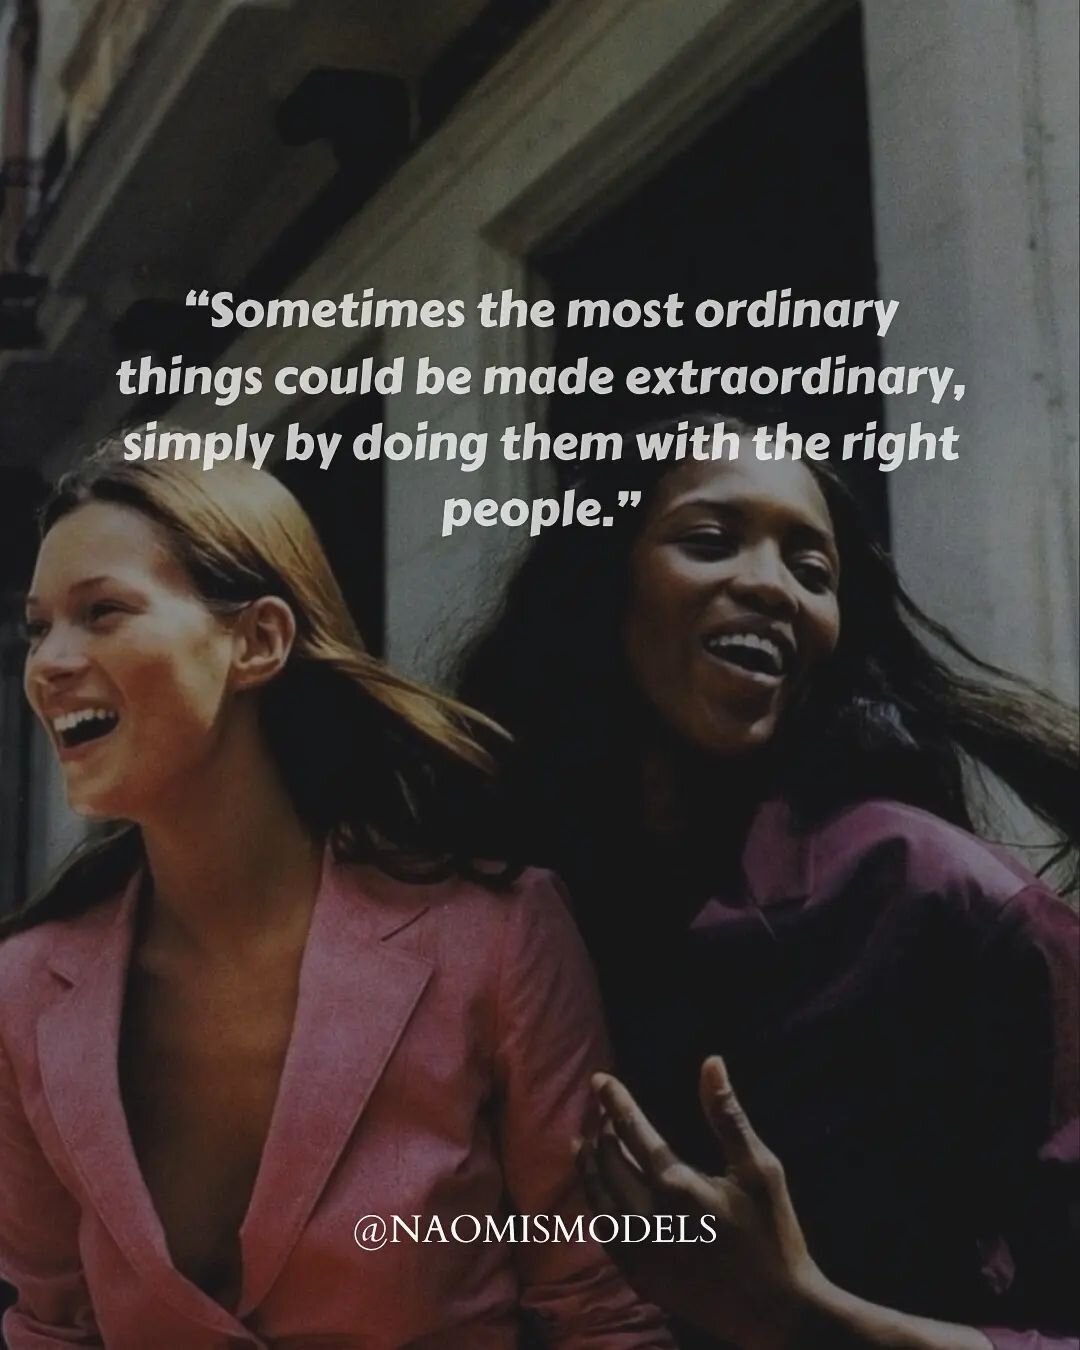 &ldquo;Sometimes the most ordinary things could be made extraordinary, simply by doing them with the right people.&rdquo;

#naomismodels #quoteoftheday #inspiration #motivation #models #nycmodels #castingagency #modelscout #selflove #selfcare #soultr